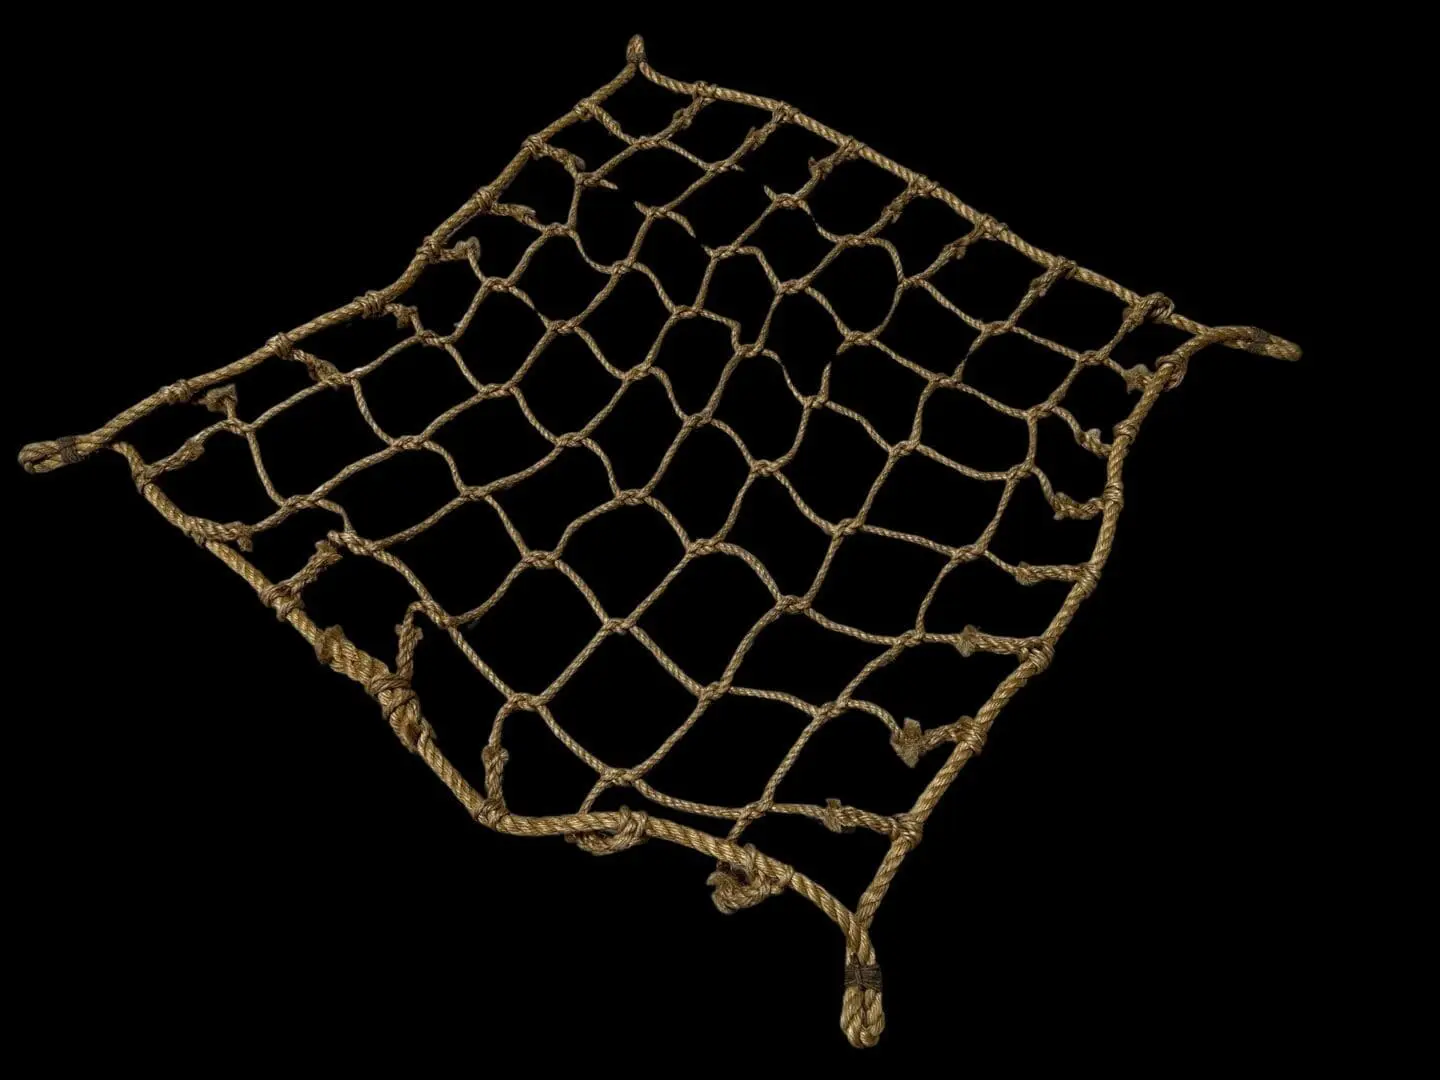 A square rope net with two ropes hanging from it.